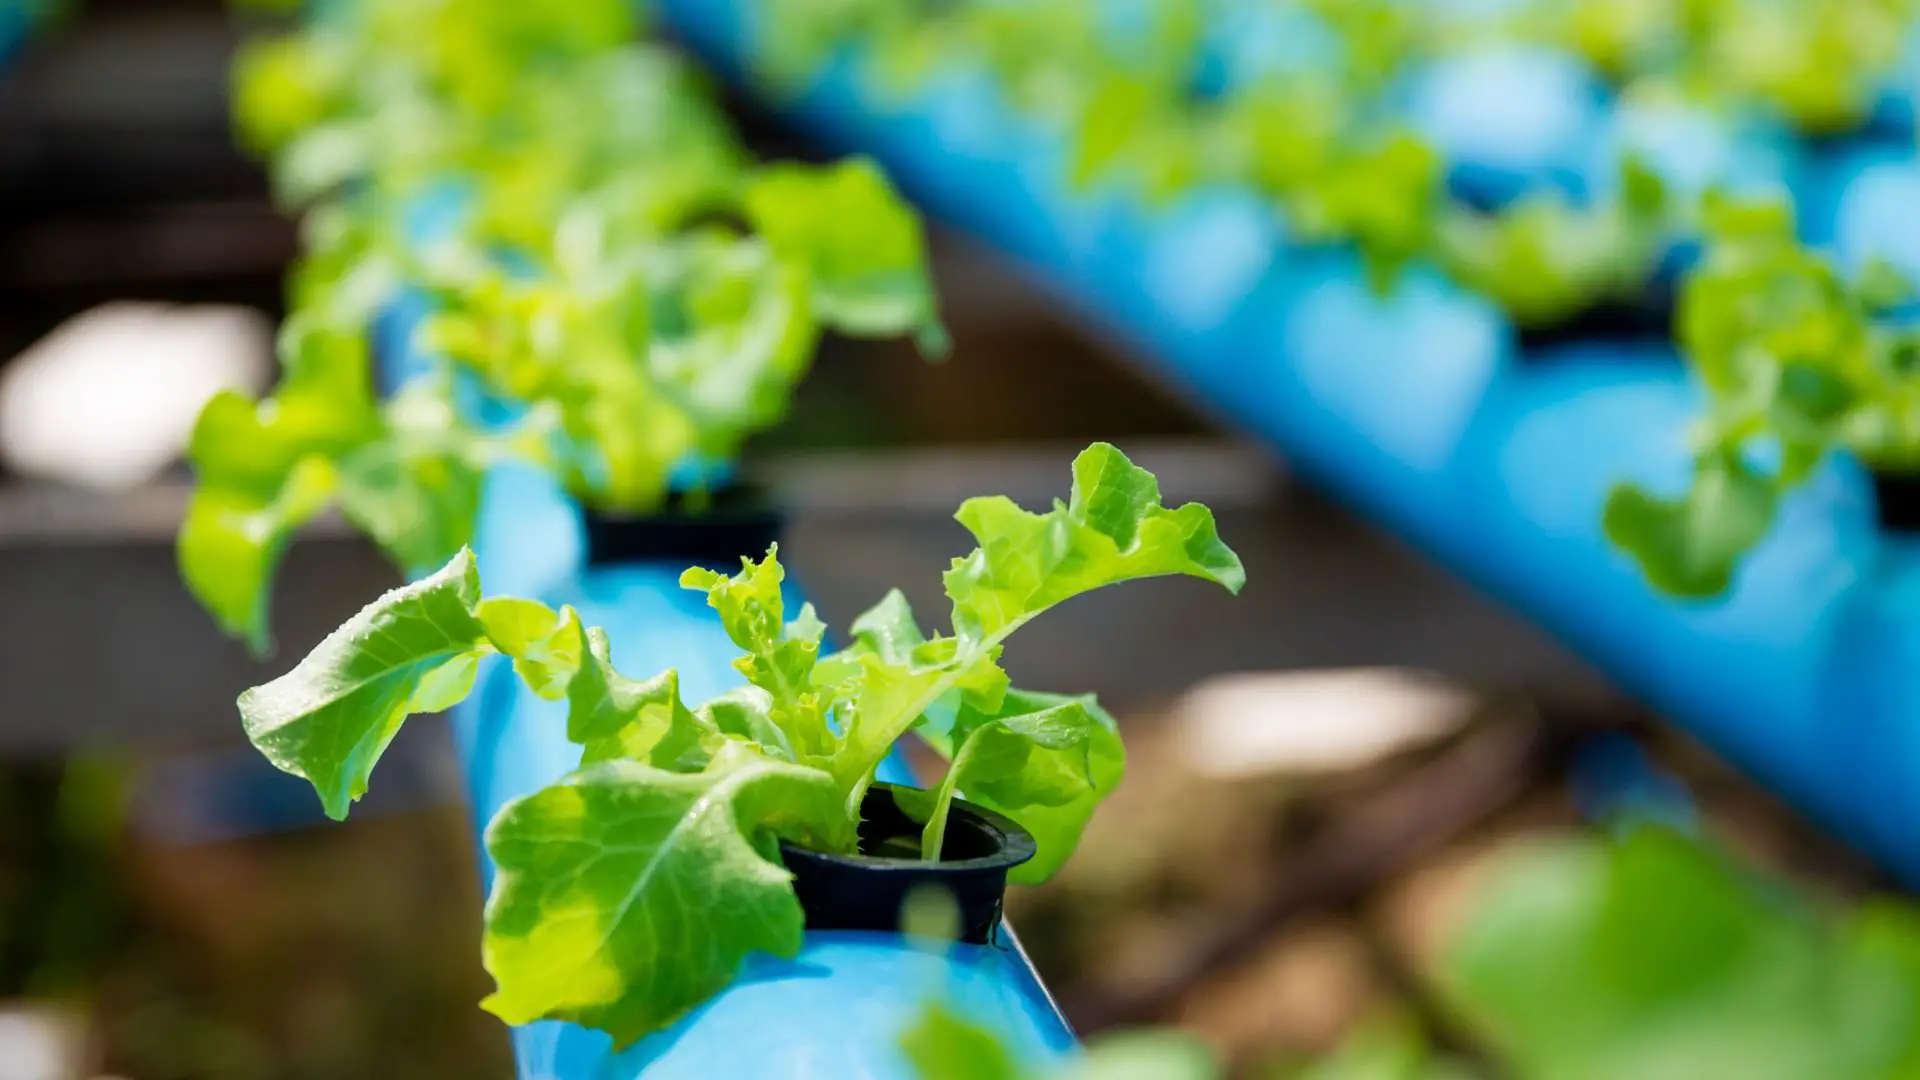 % Find out how you can start saving by building your own affordable hydroponic system!